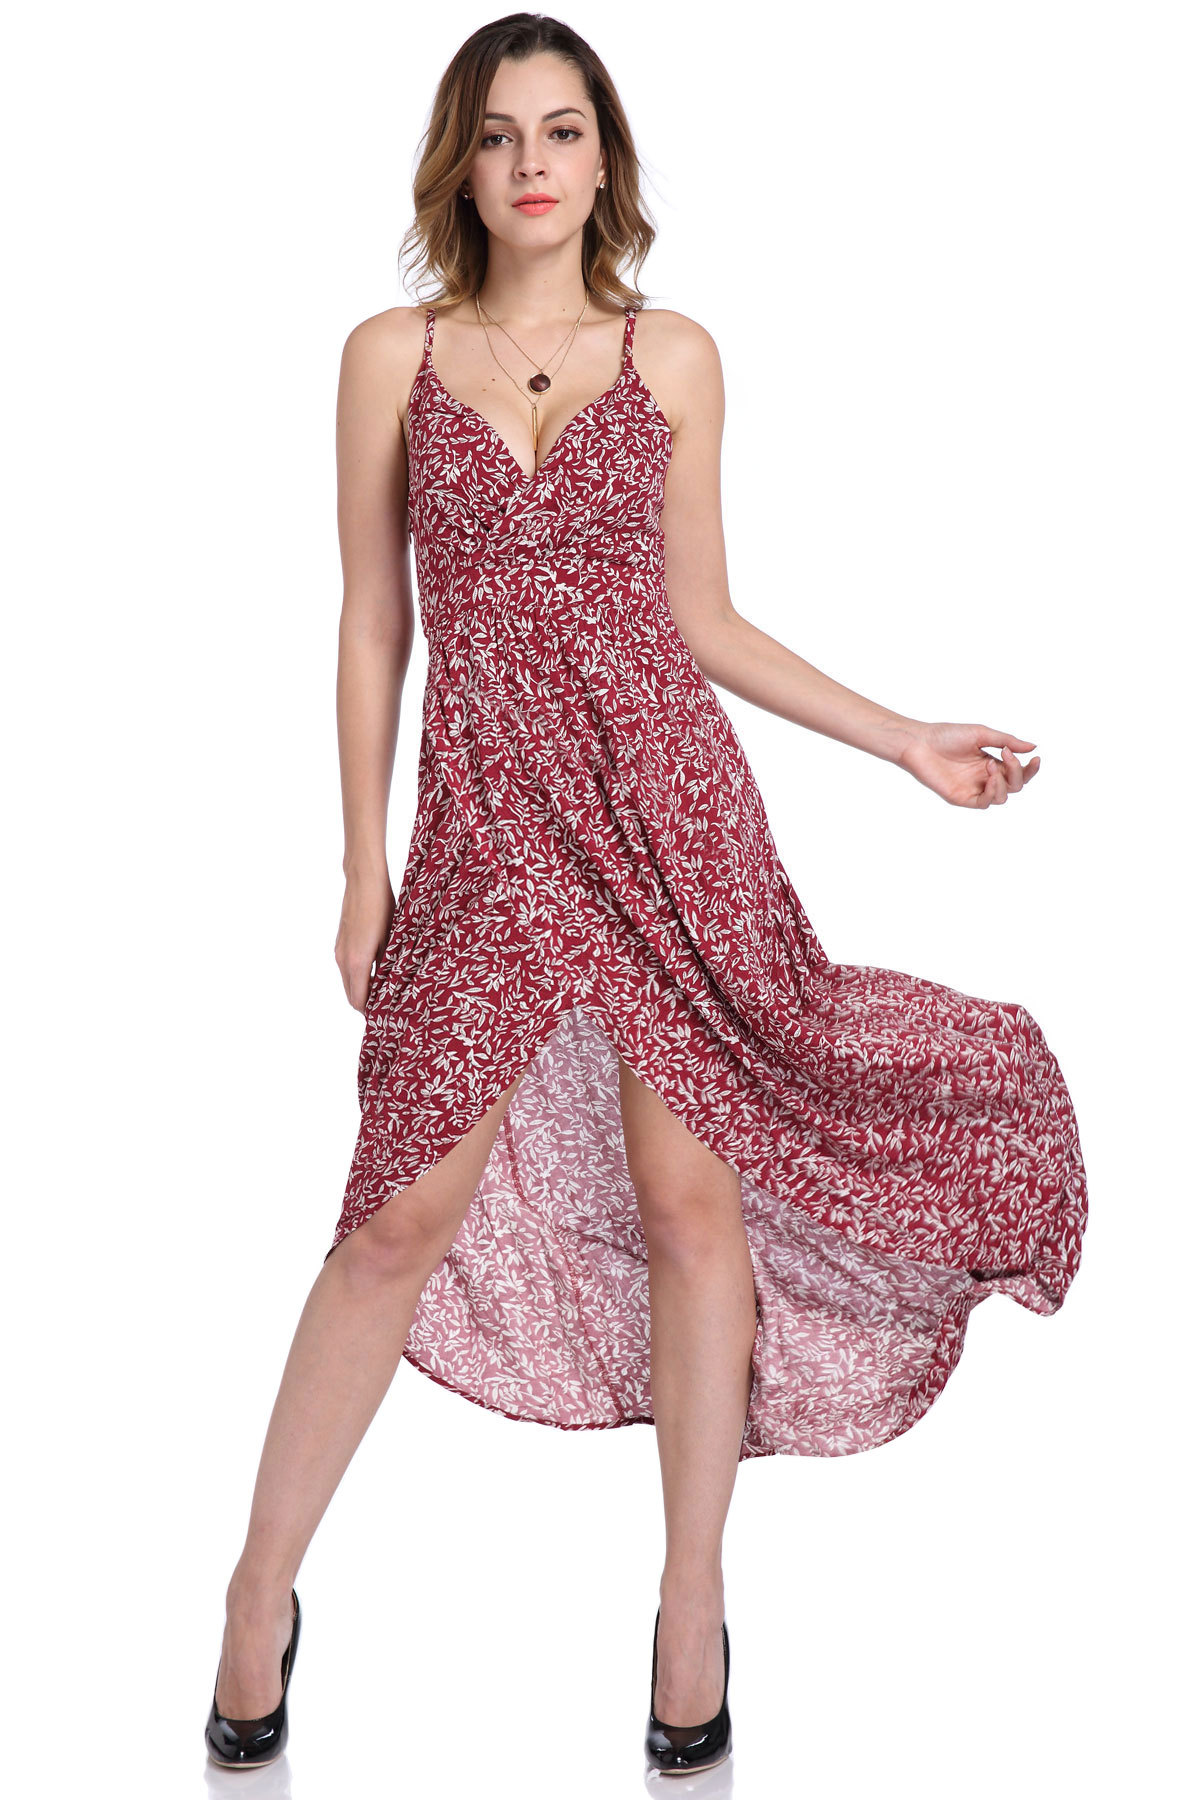 Sleeveless Deep V Neck Floral Printed Maxi Dress - Wine Red